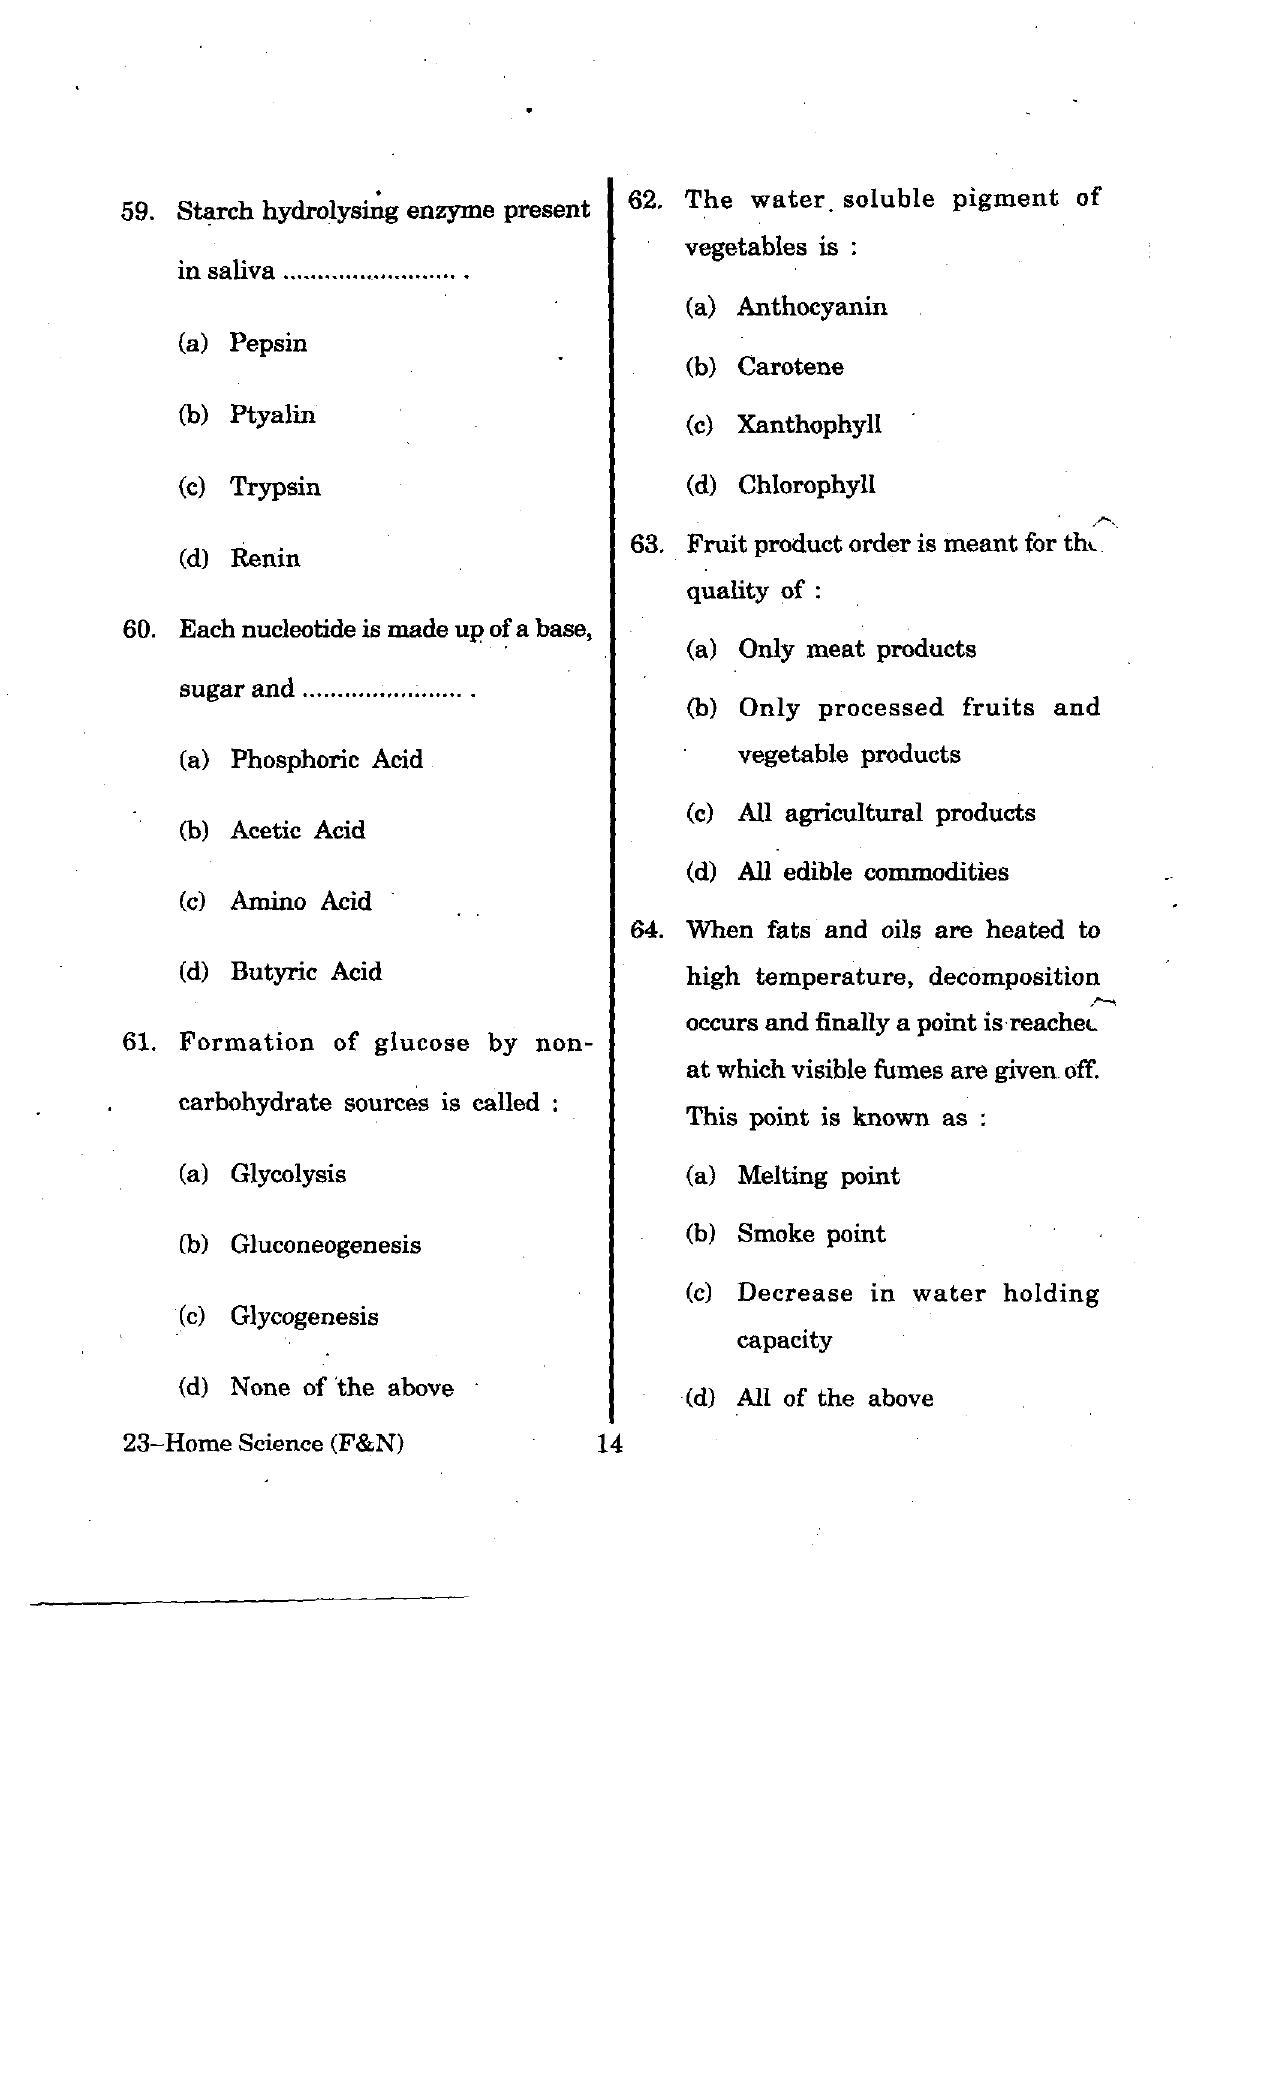 URATPG Home Science(Food & Nut.) 2012 Question Paper - Page 14